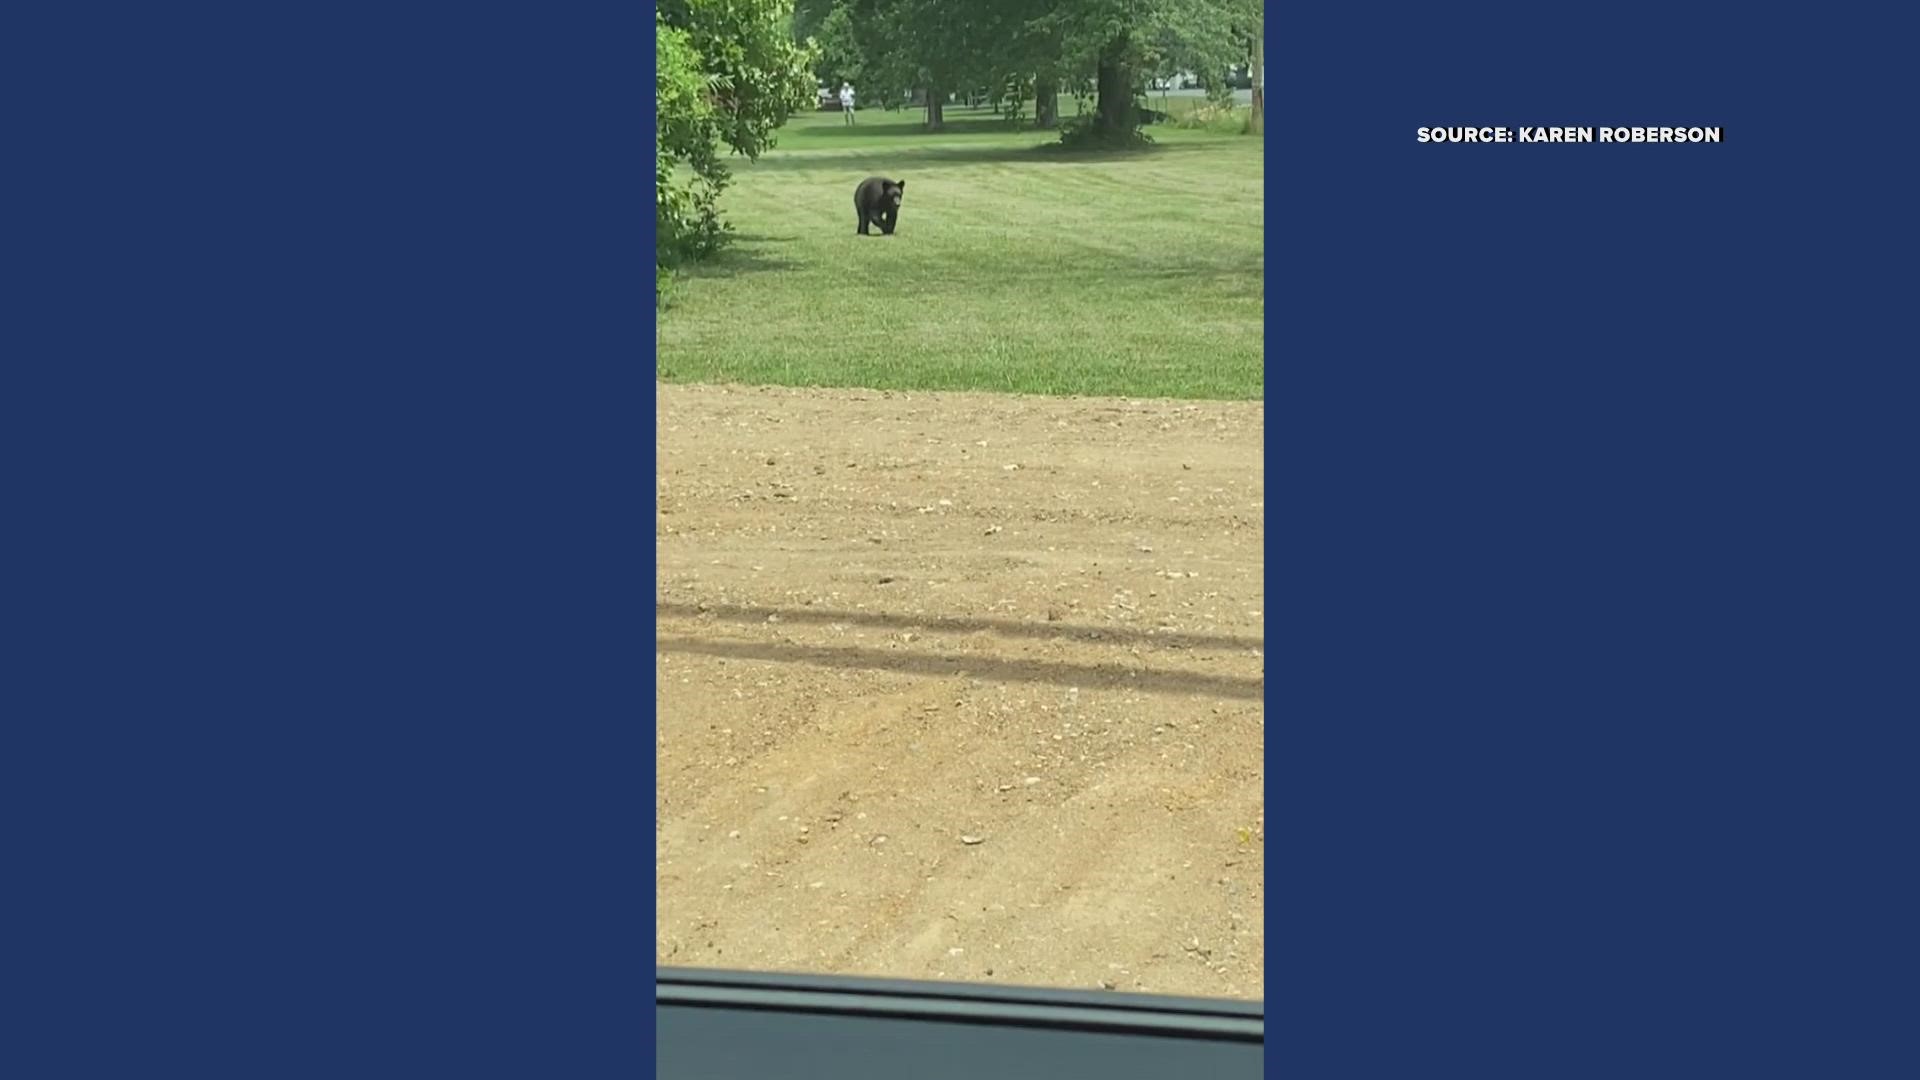 Karen Roberson spotted the bear the other day roaming around the Kernersville area.